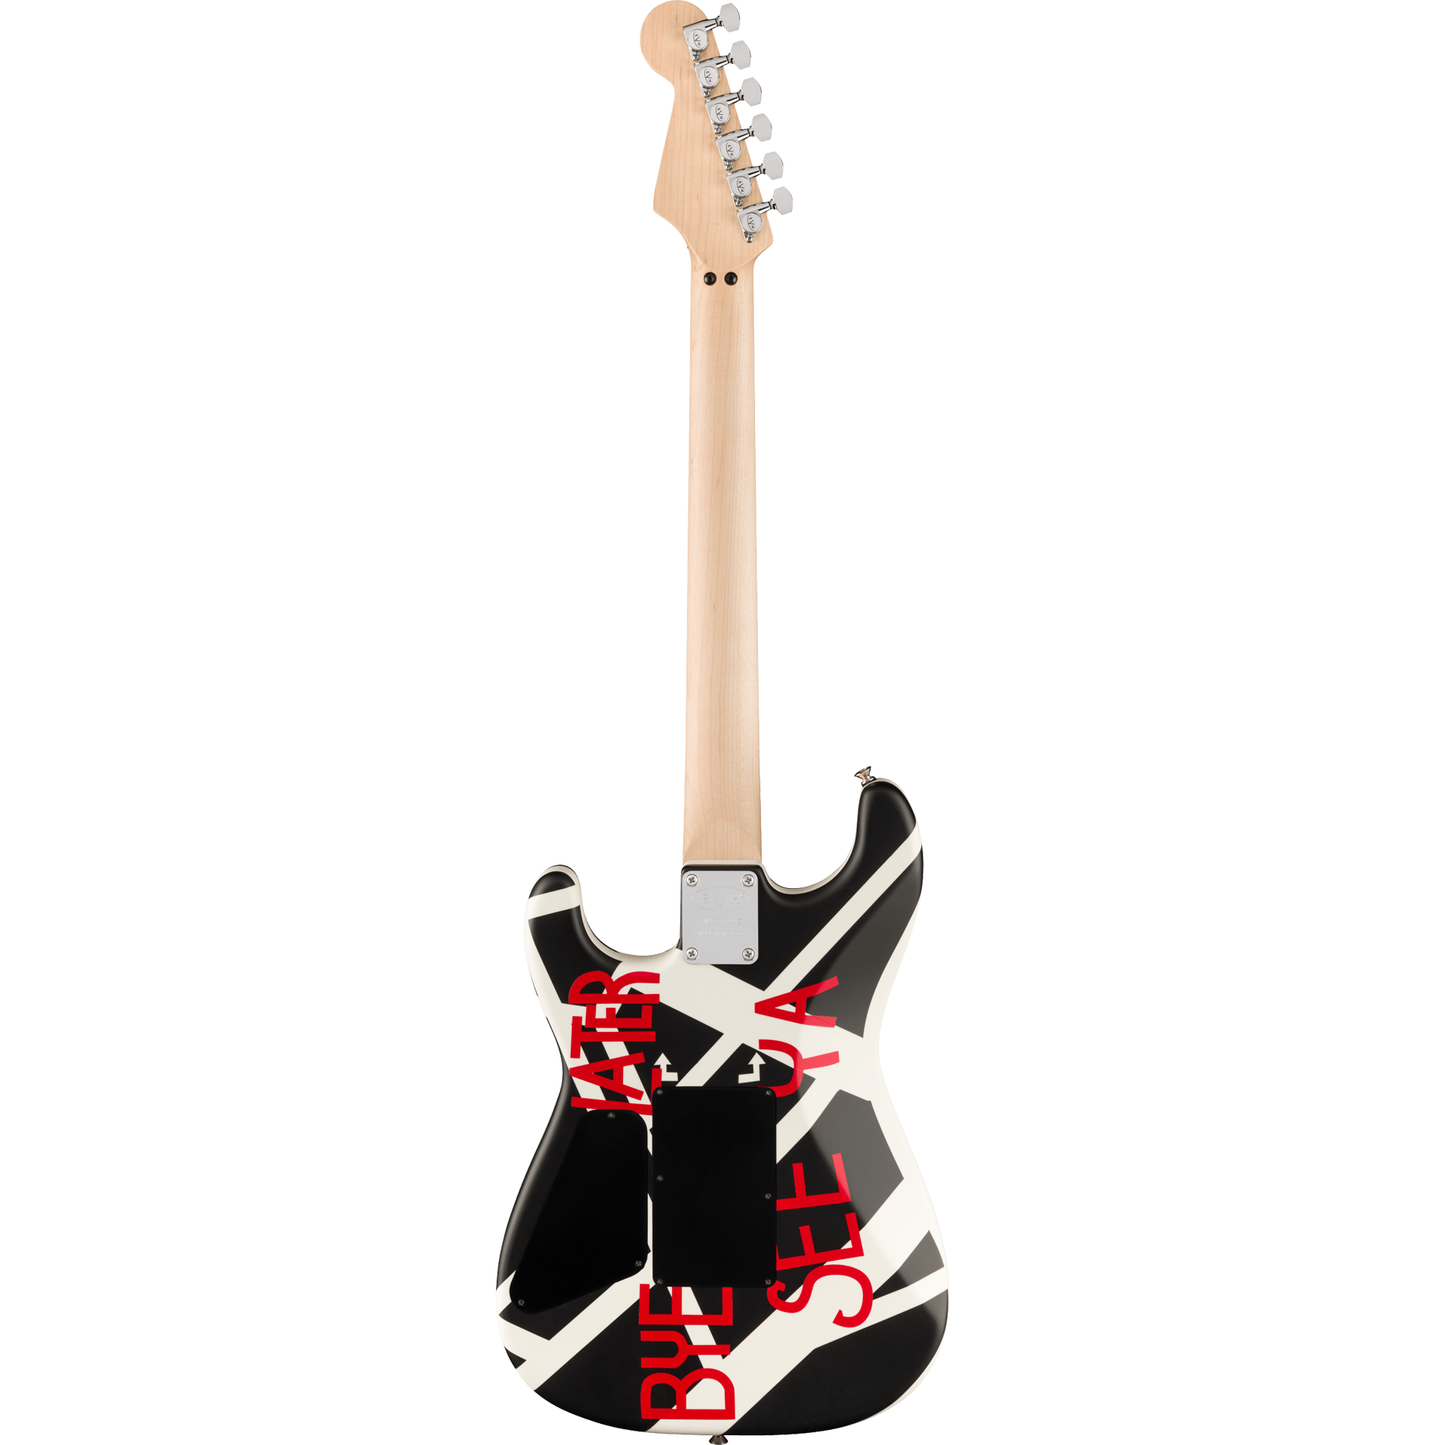 EVH Striped Series Circles Electric Guitar - Maple Fingerboard, White and Black